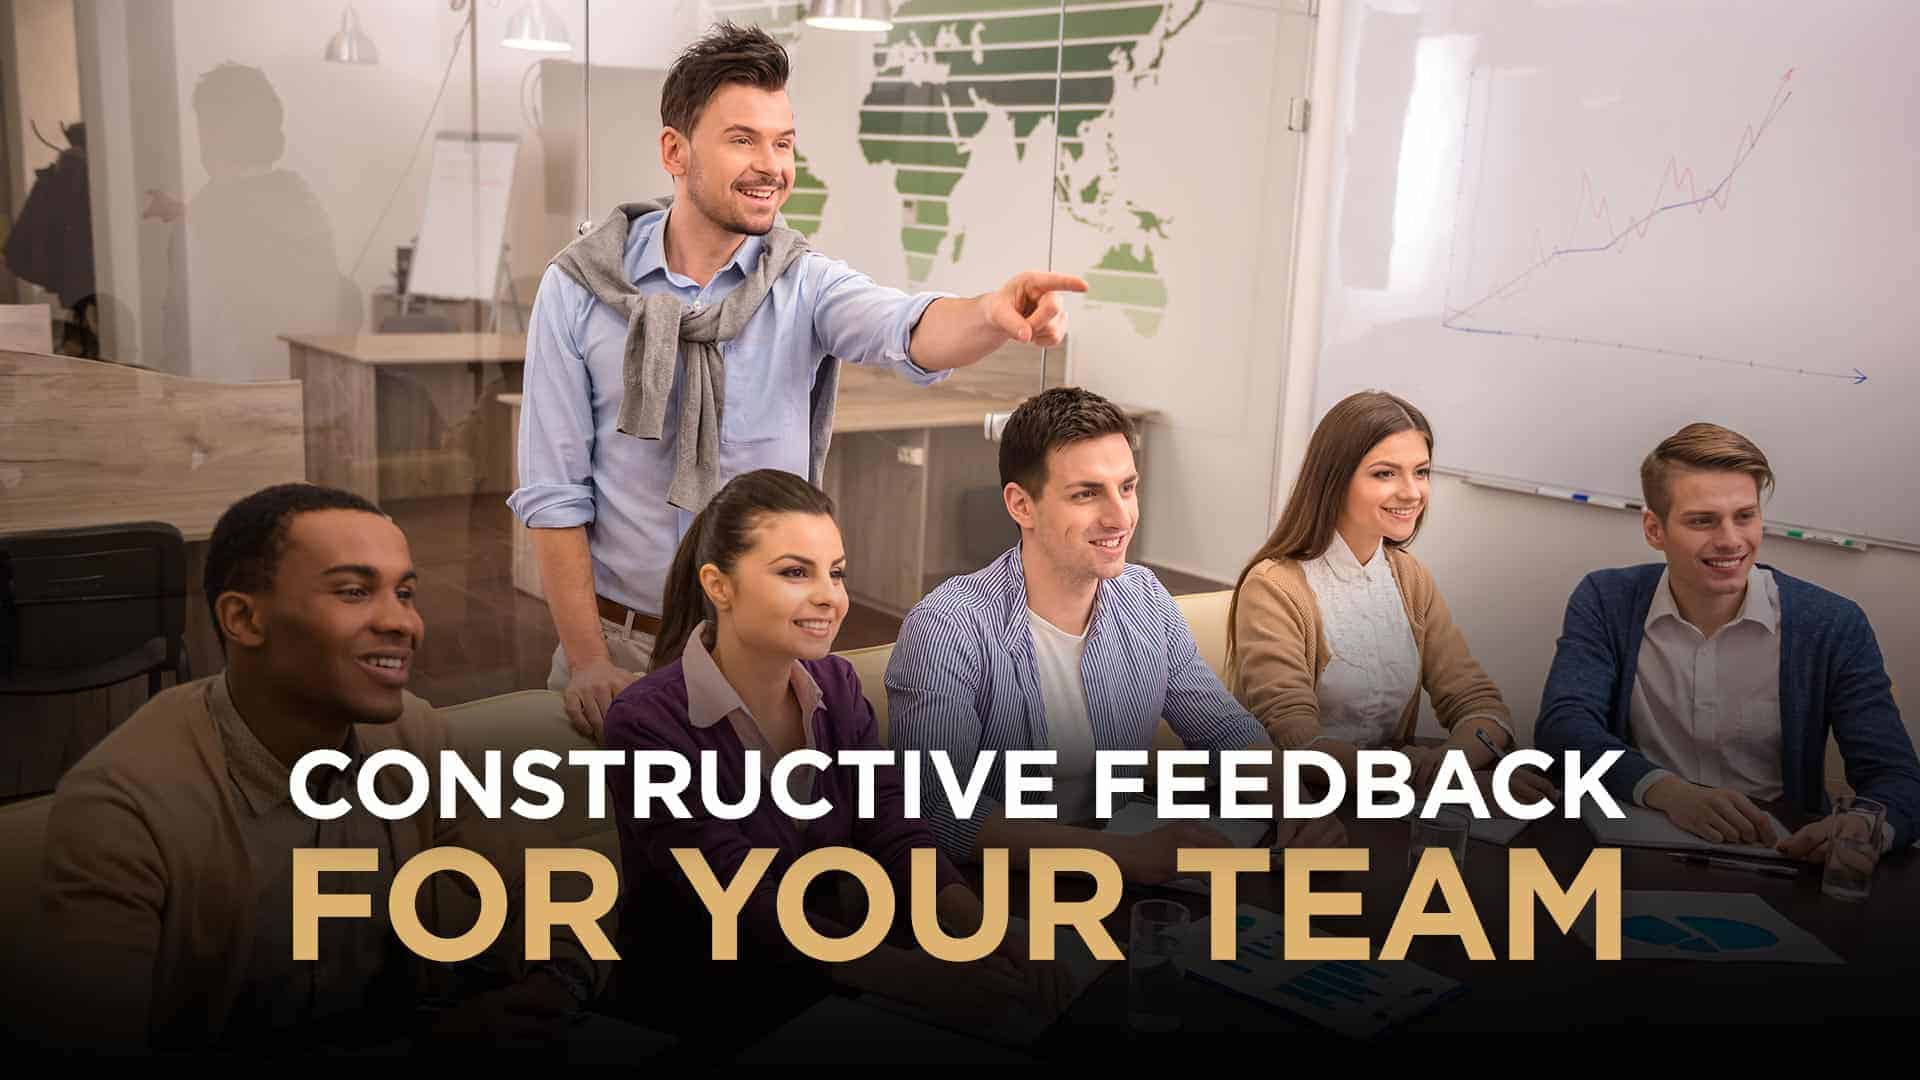 How-To-Provide-Constructive-Feedback-To-Your-Team-Members